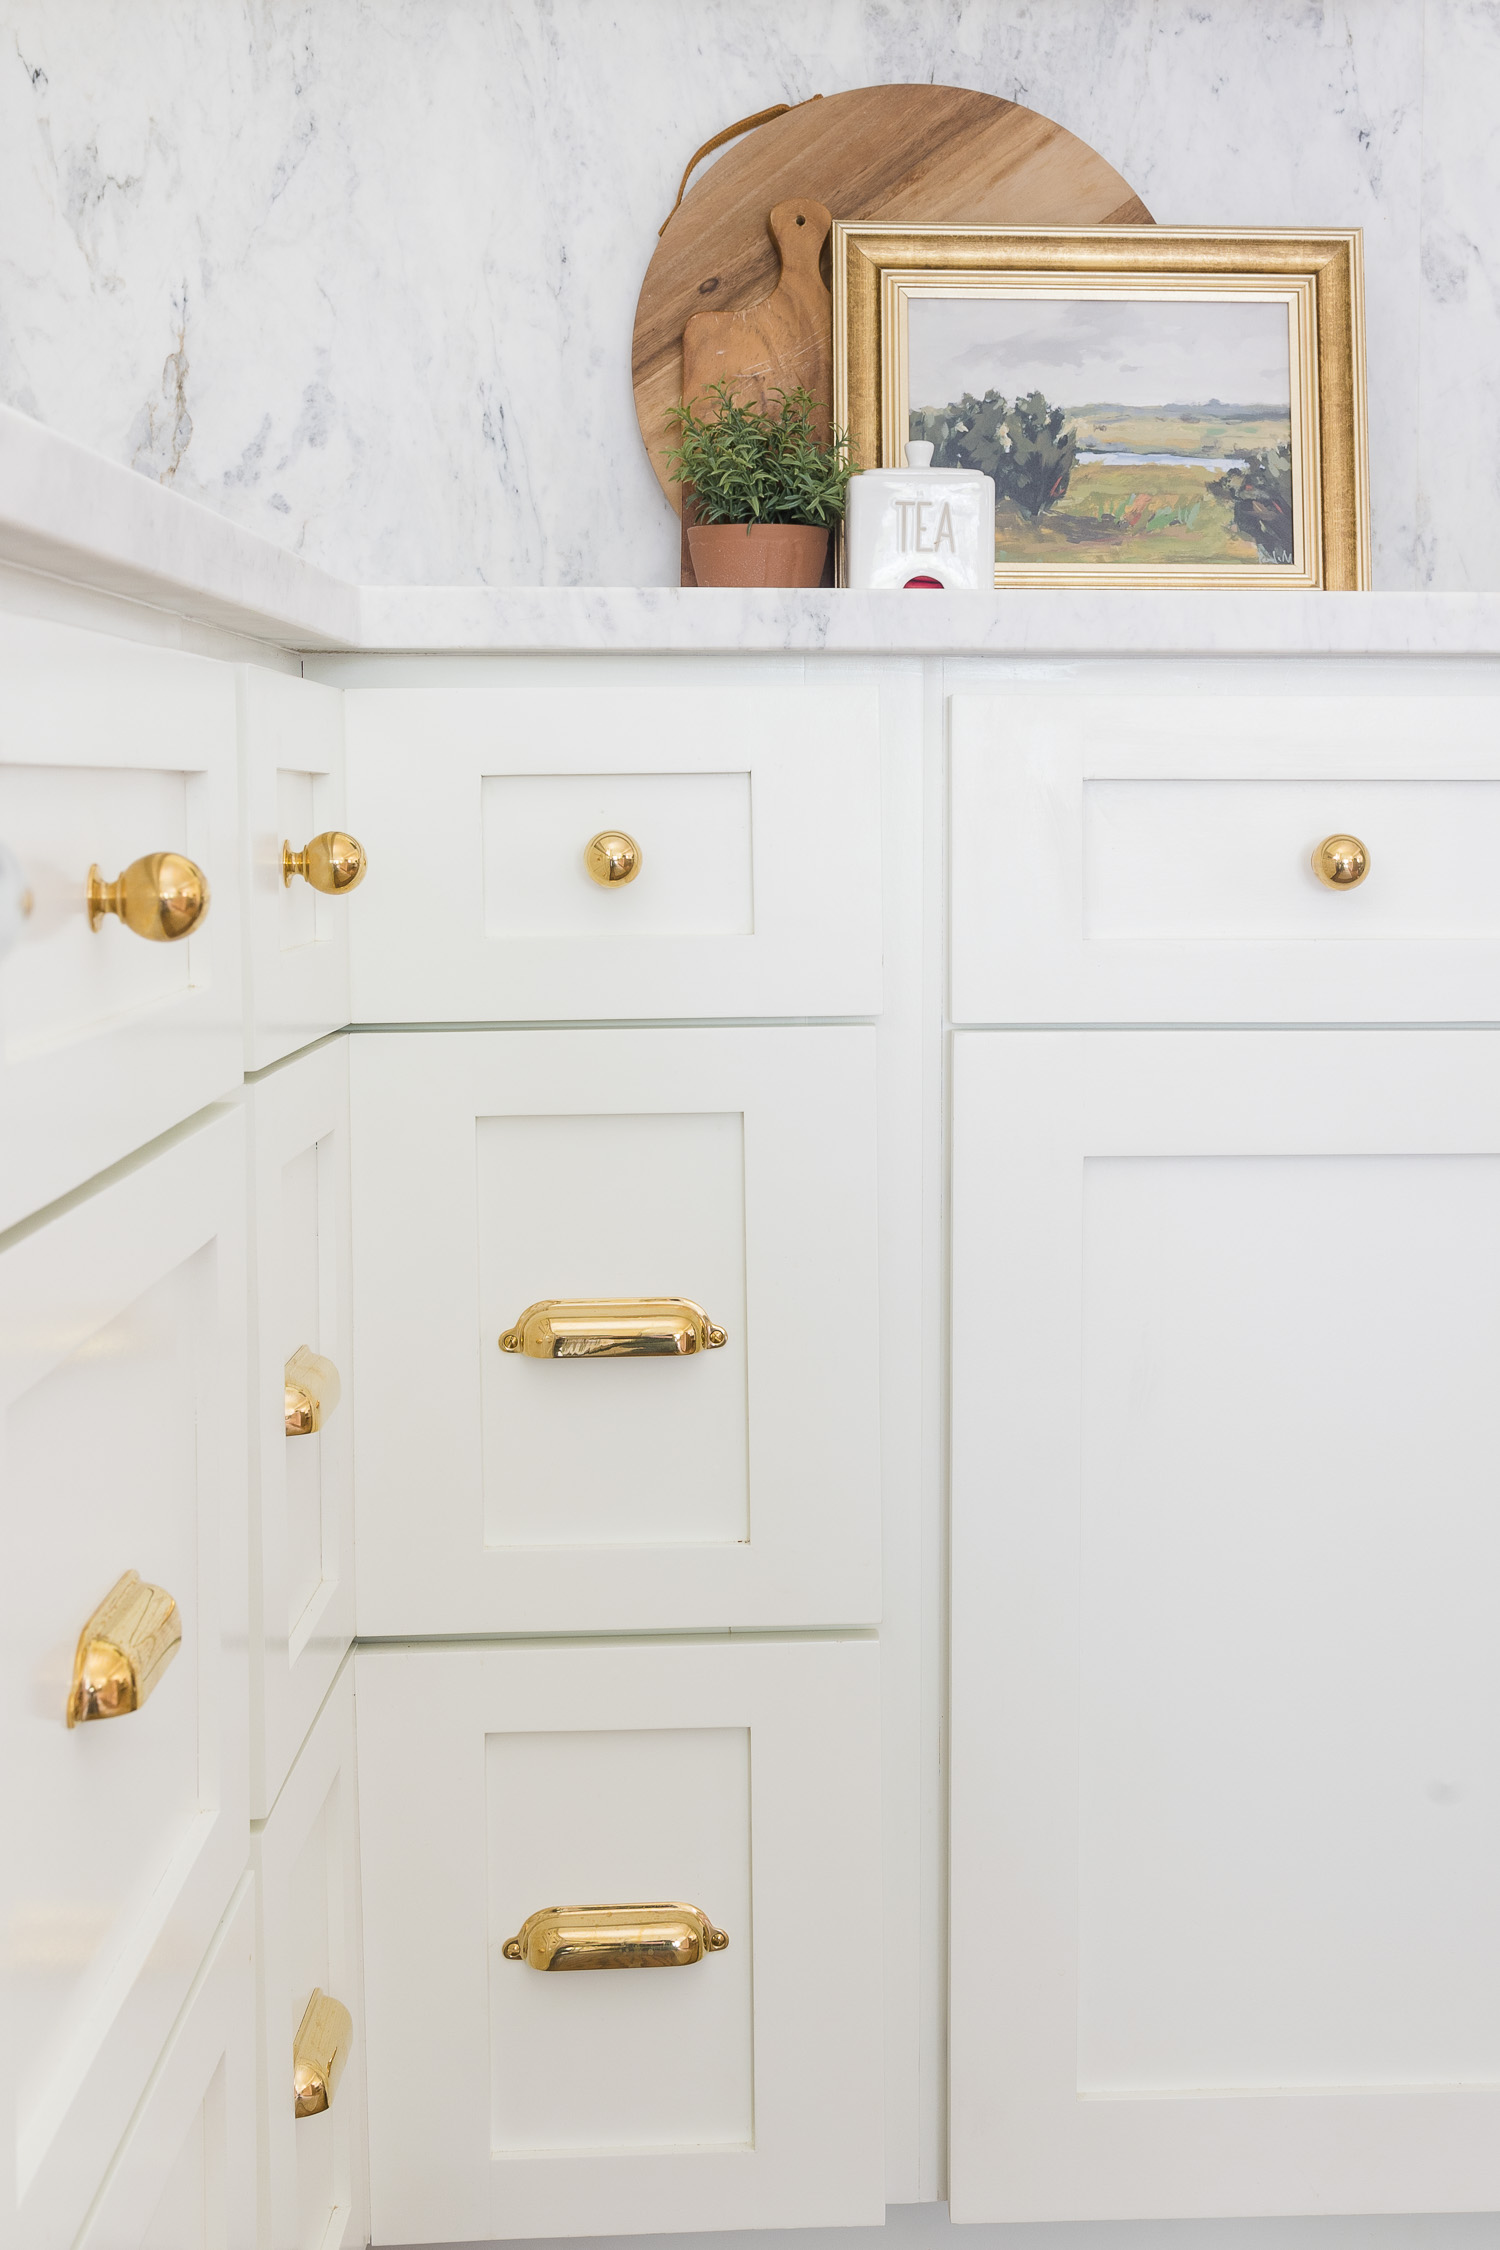 benjamin moore simply white kitchen cabinets with brass hardware